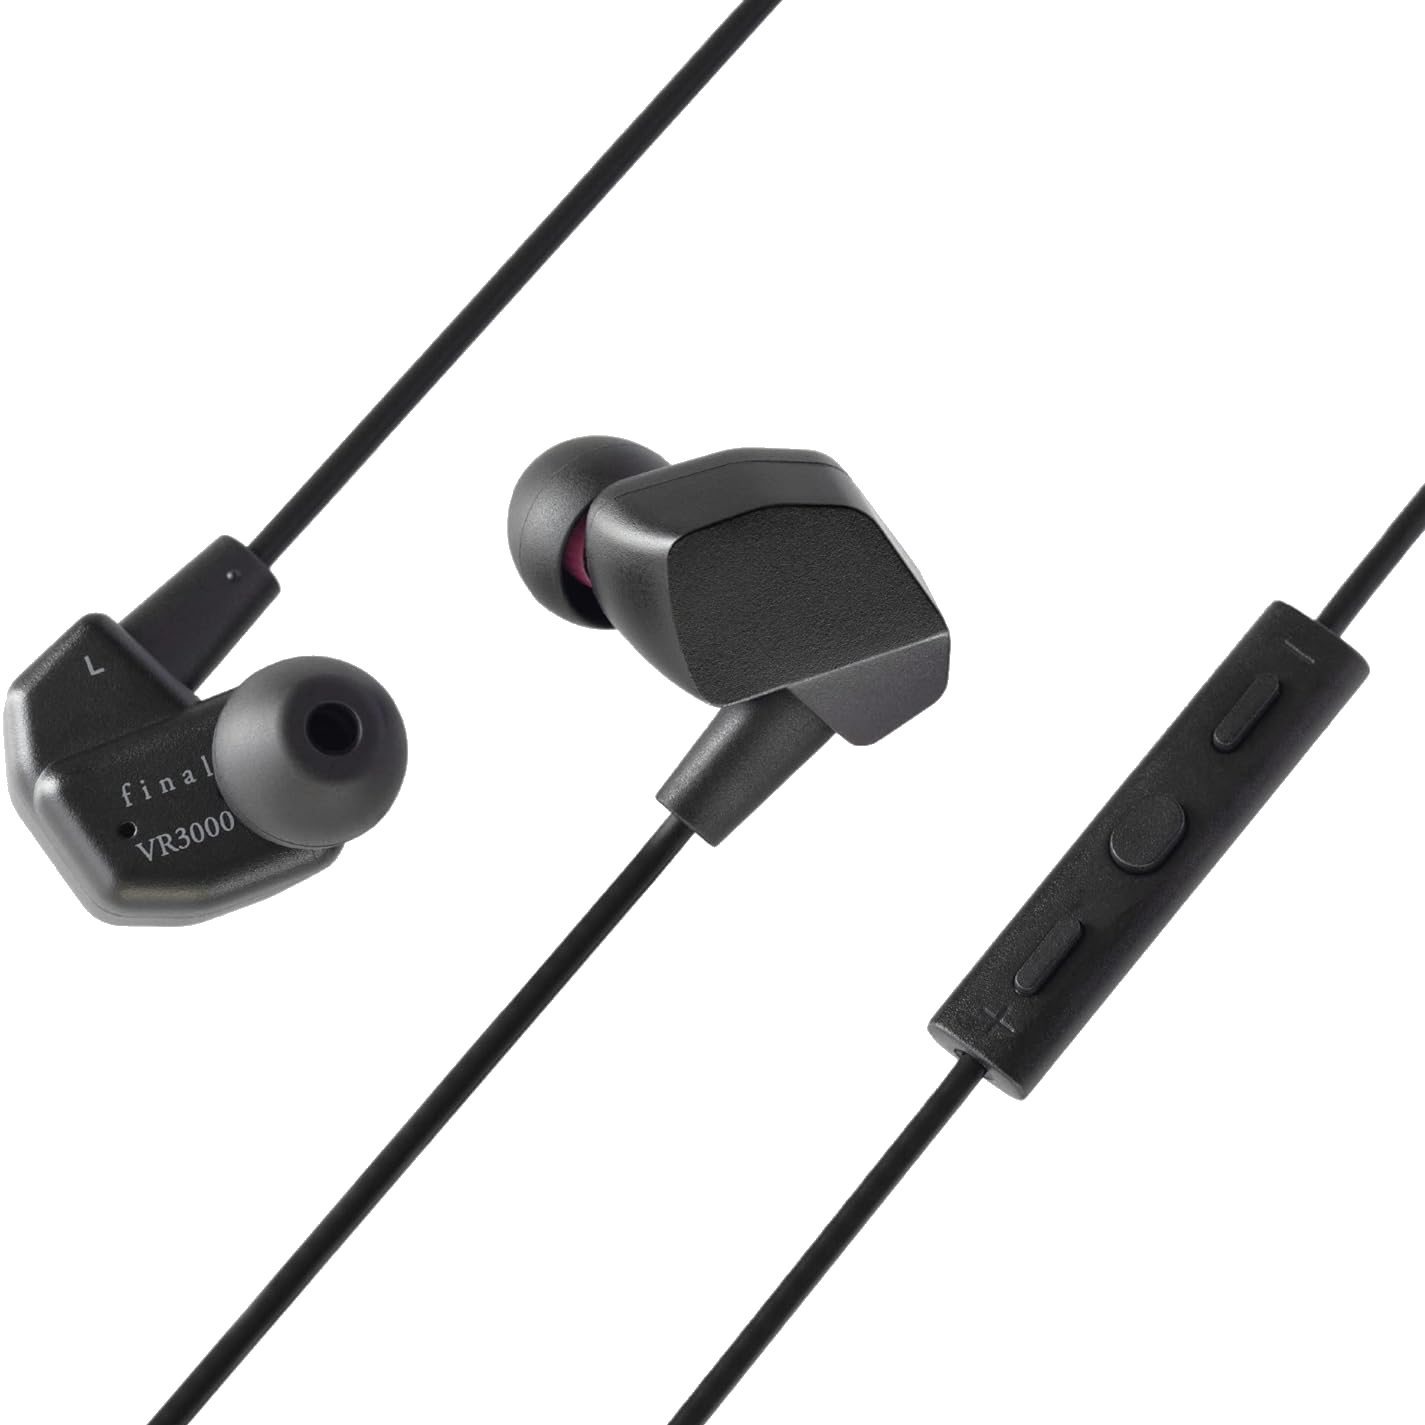 Final VR3000 gaming earbuds with three button controller